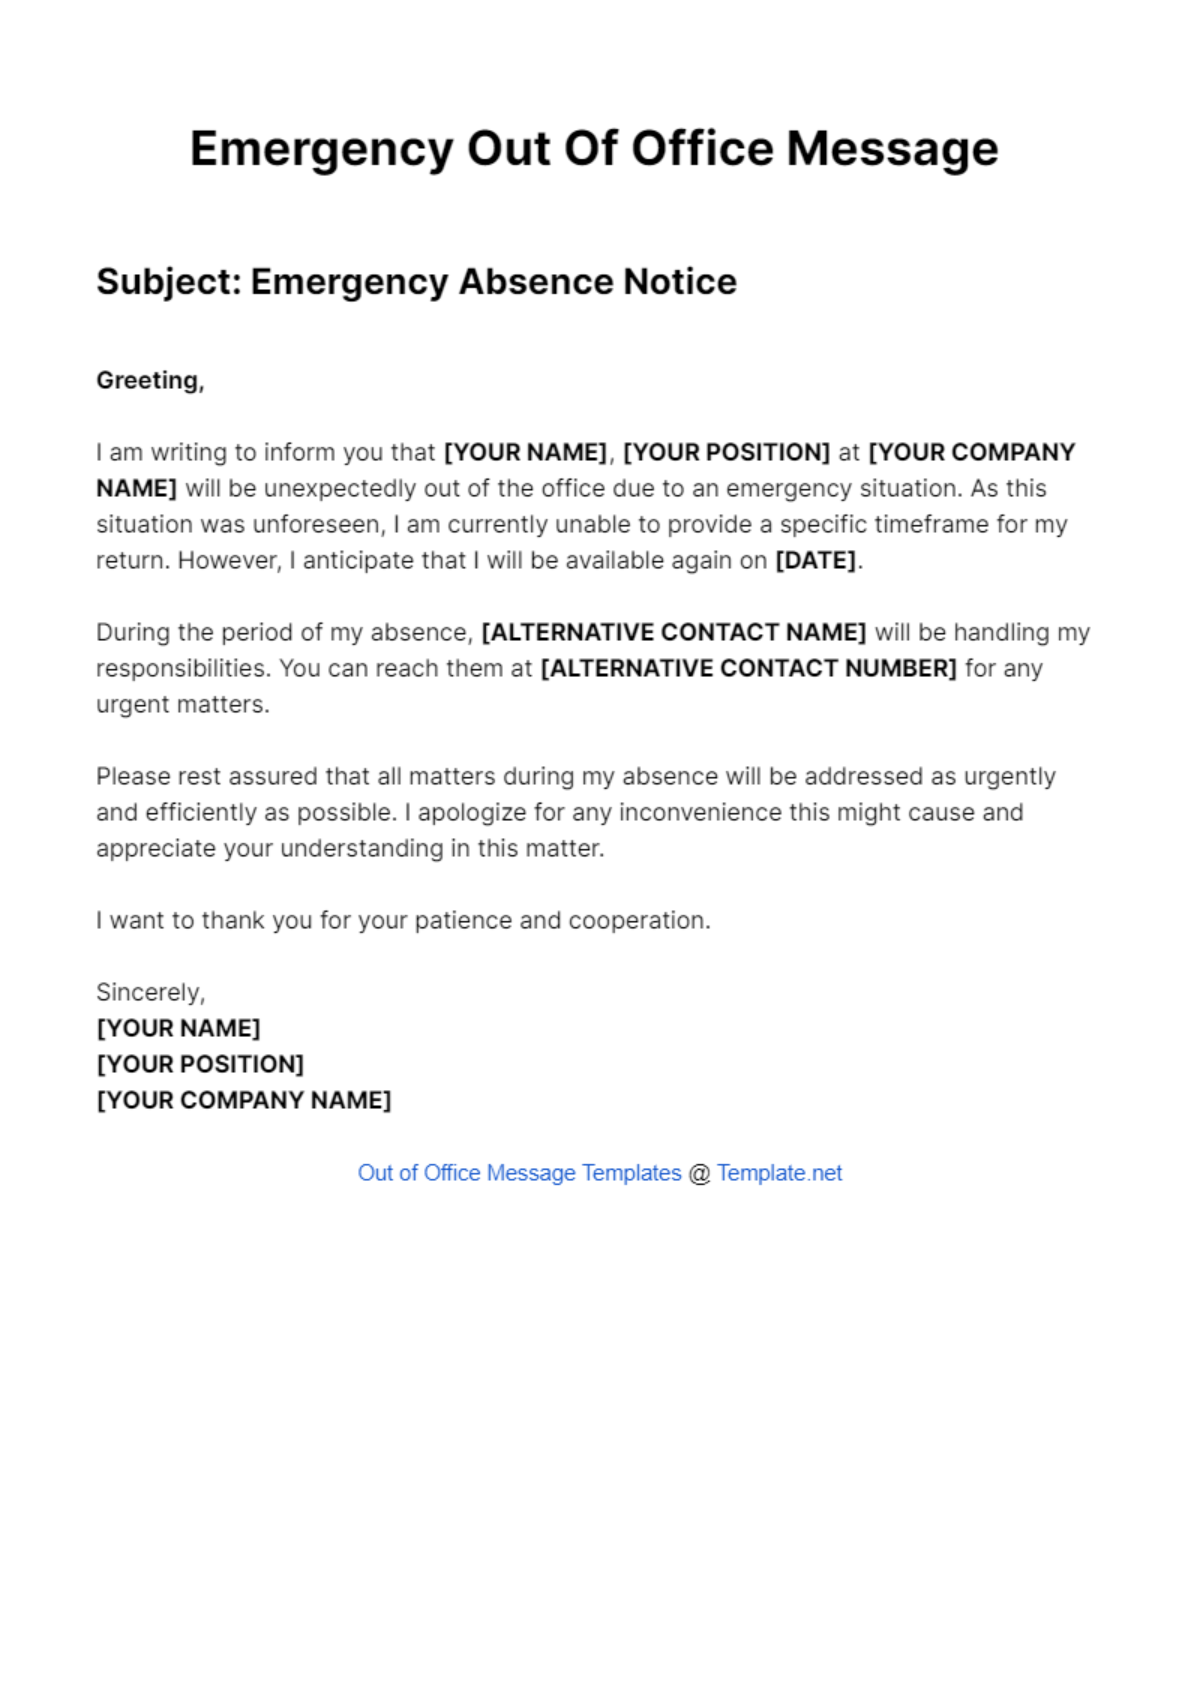 Emergency Out Of Office Message Template